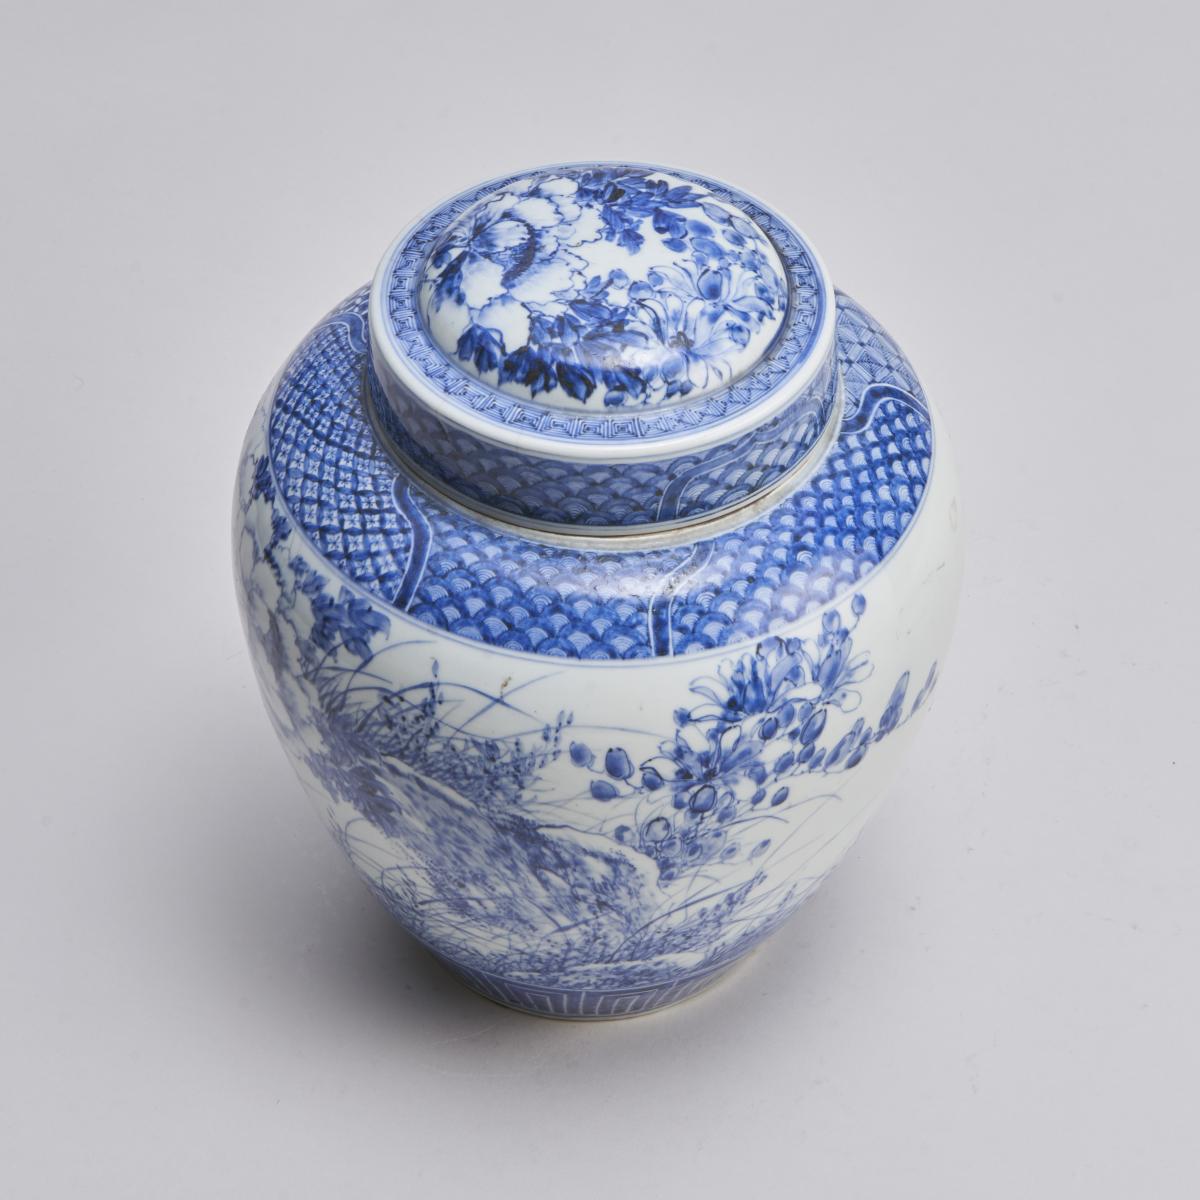 An unusual Japanese porcelain blue and white jar with inner stopper (19th Century)